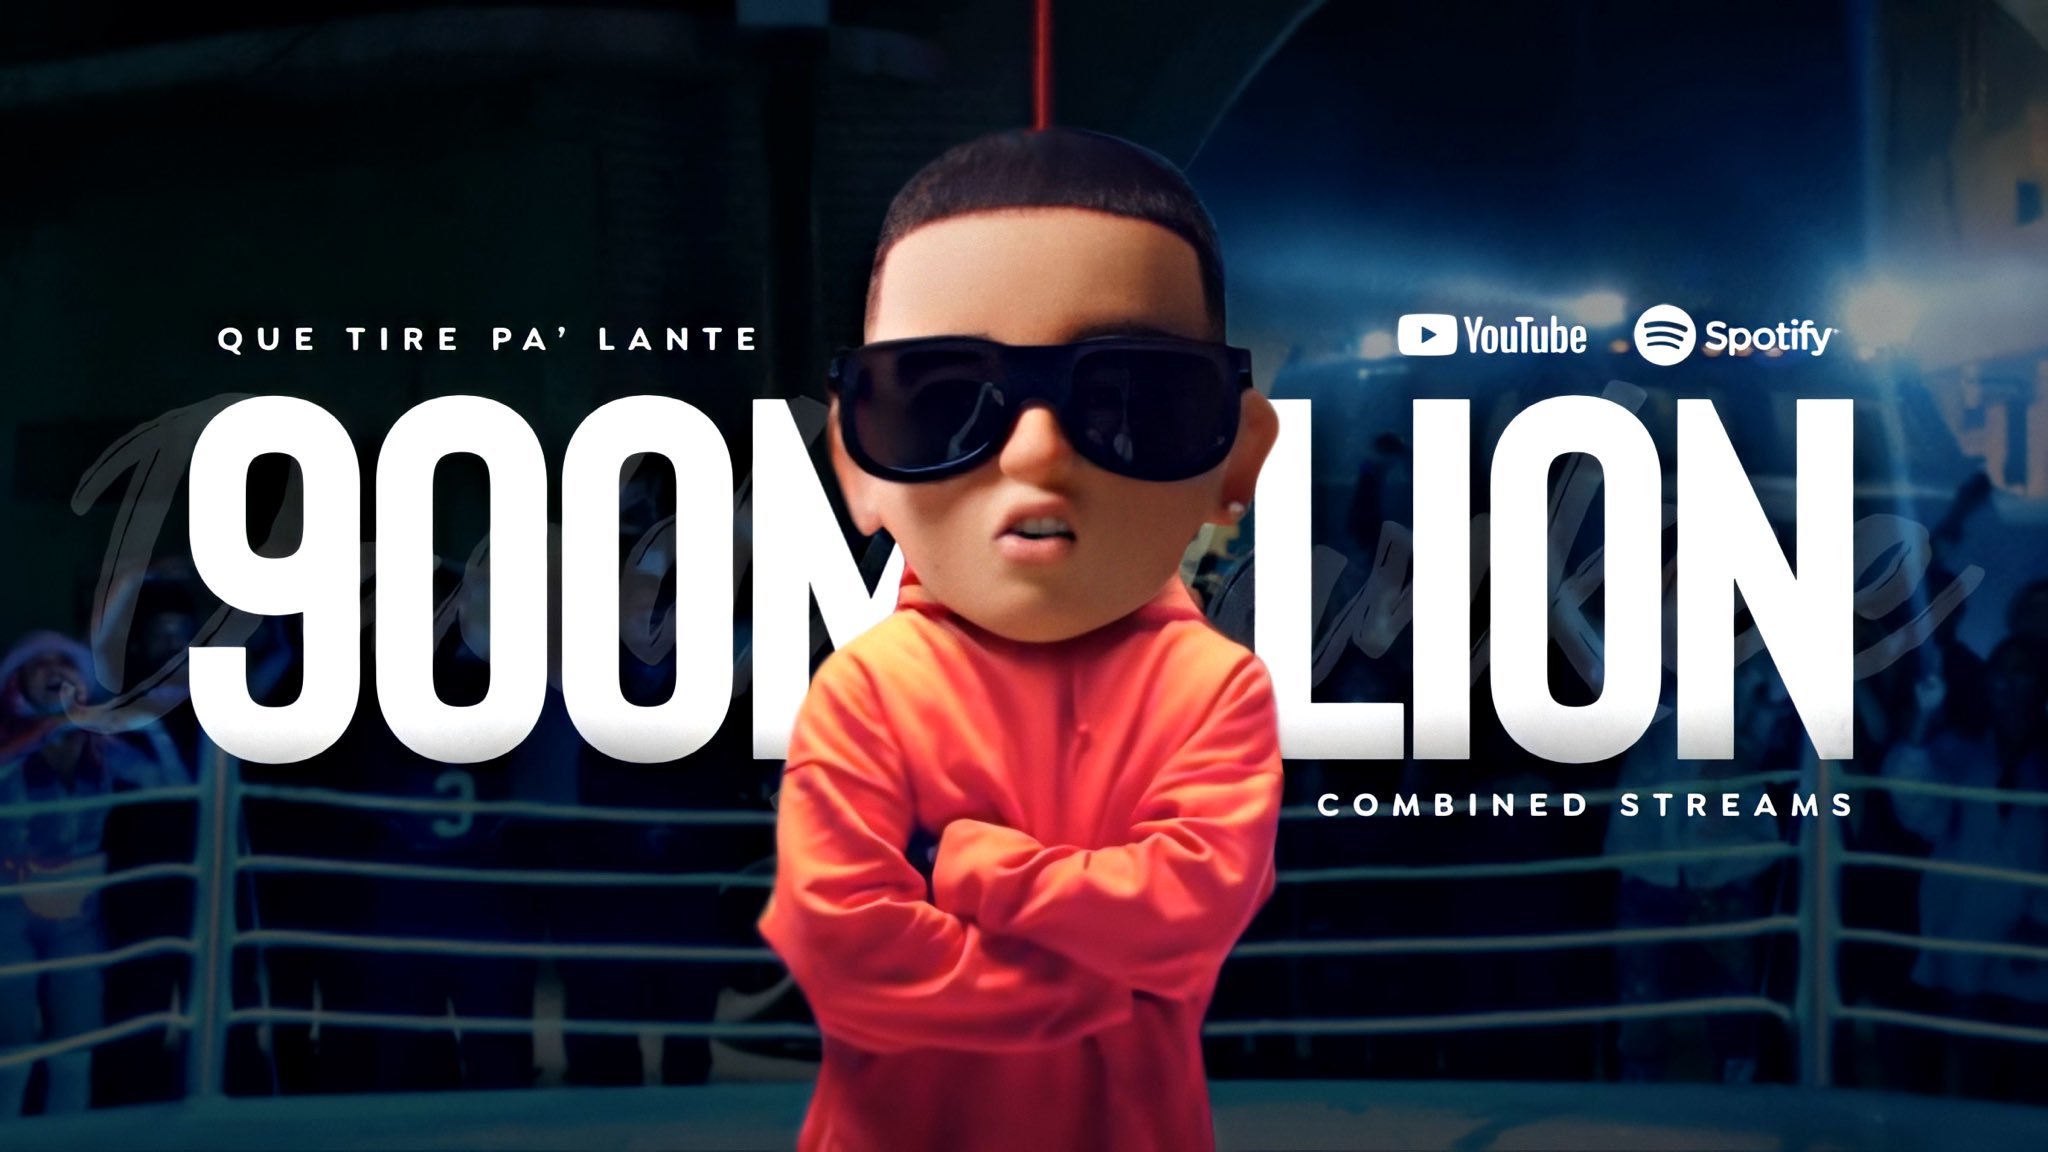 Daddy Yankee Charts💧 on Twitter: "Daddy Yankee's "Que Tire Pa' has now surpassed 900M streams on and Youtube! https://t.co/AfIy0IyVuU" / Twitter